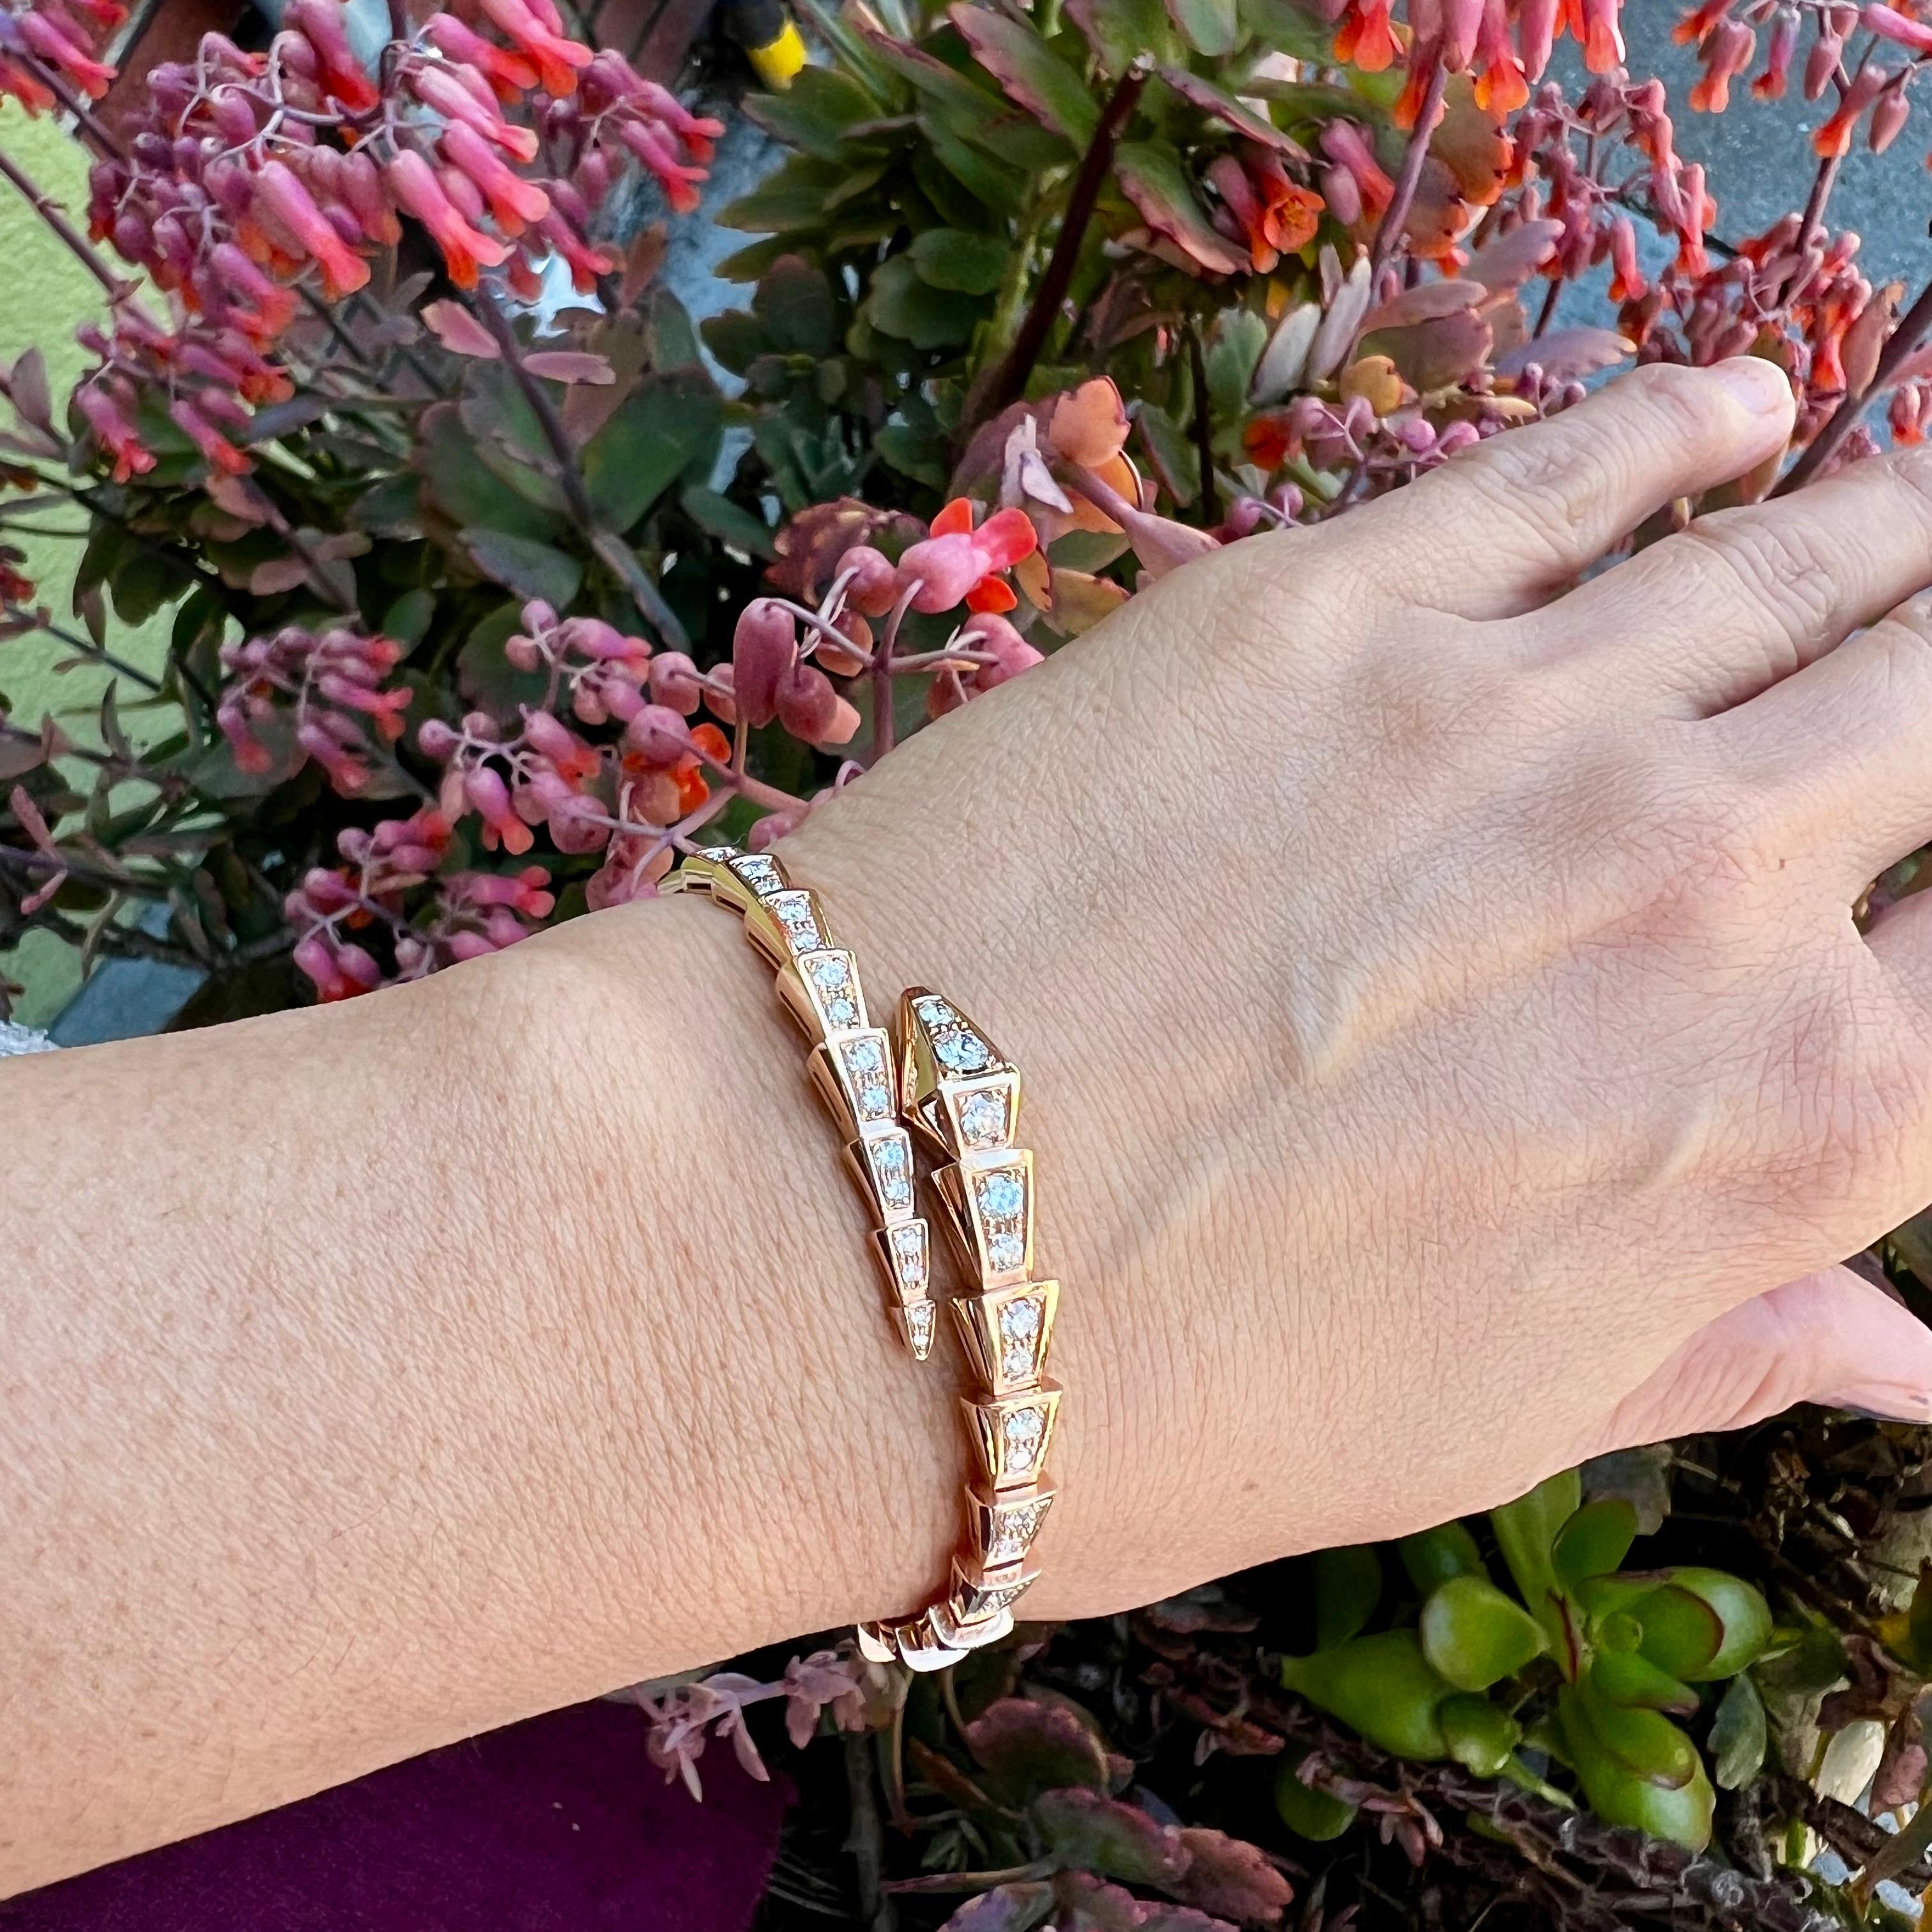 This beautiful serpent bracelet is 18 Karat rose gold has 2.80 carats of VS1 F color diamonds...58 total.  Part of Bvlgari's iconic Serpenti collection representing wisdom, vitality, and seduction. The Bvlgari Serpenti Viper one-coil slim bracelet